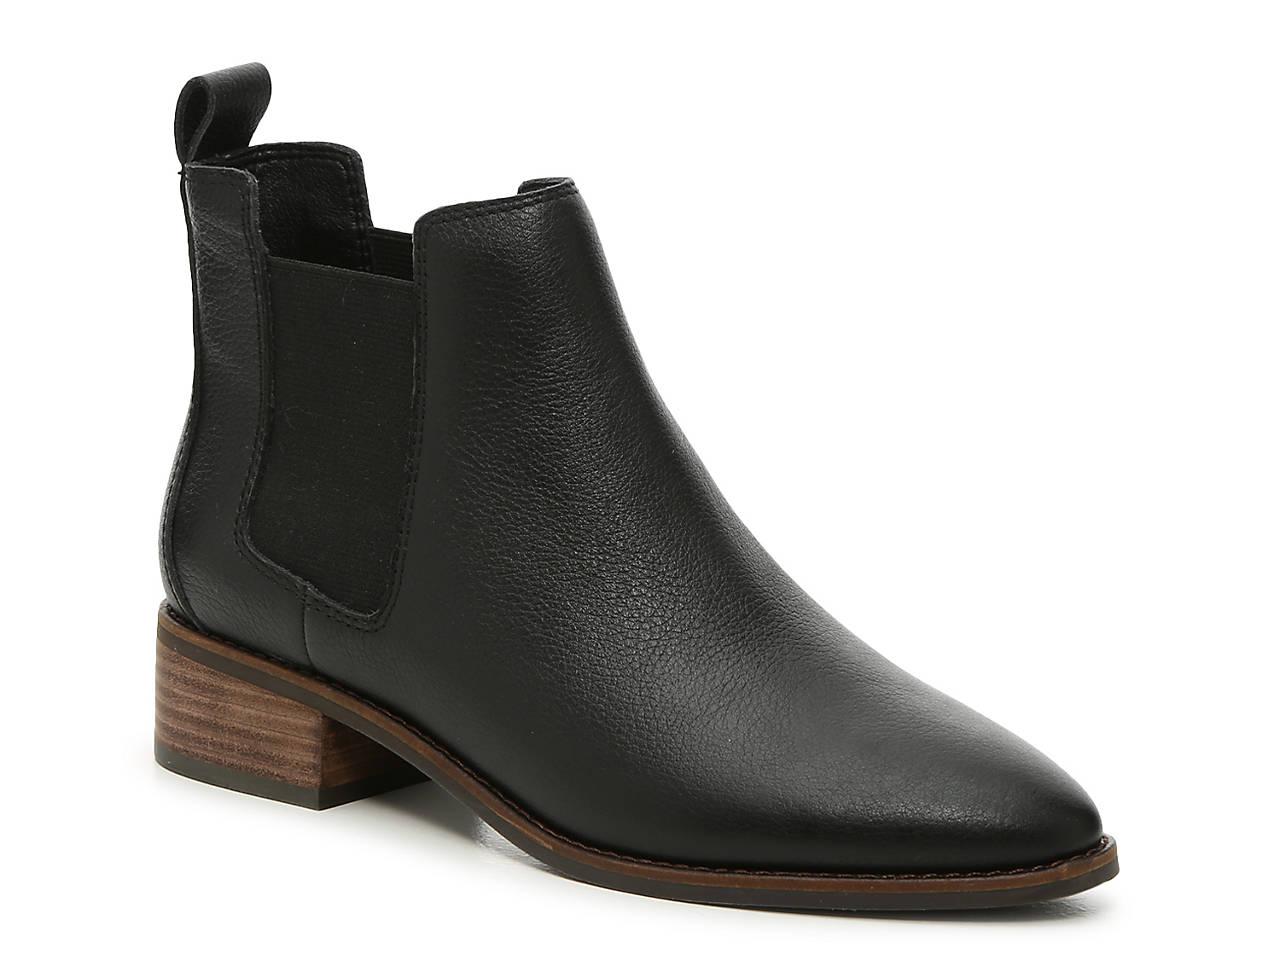 Lucky Brand Suede Lufti Chelsea Boot in Black Leather (Black) - Lyst